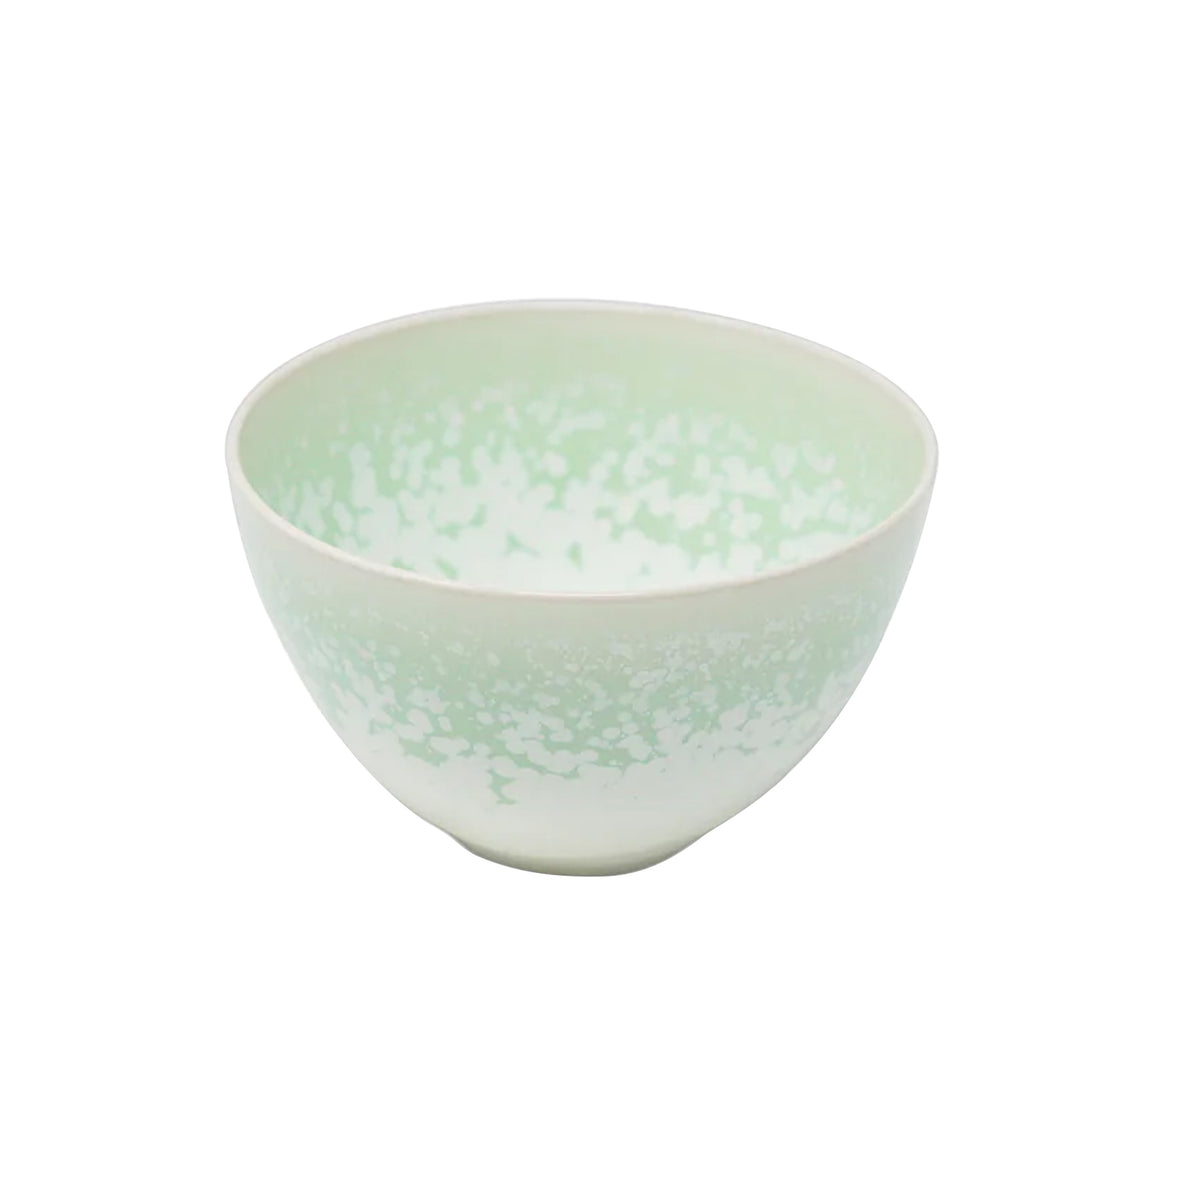 SONG Almond - Bowl, extra